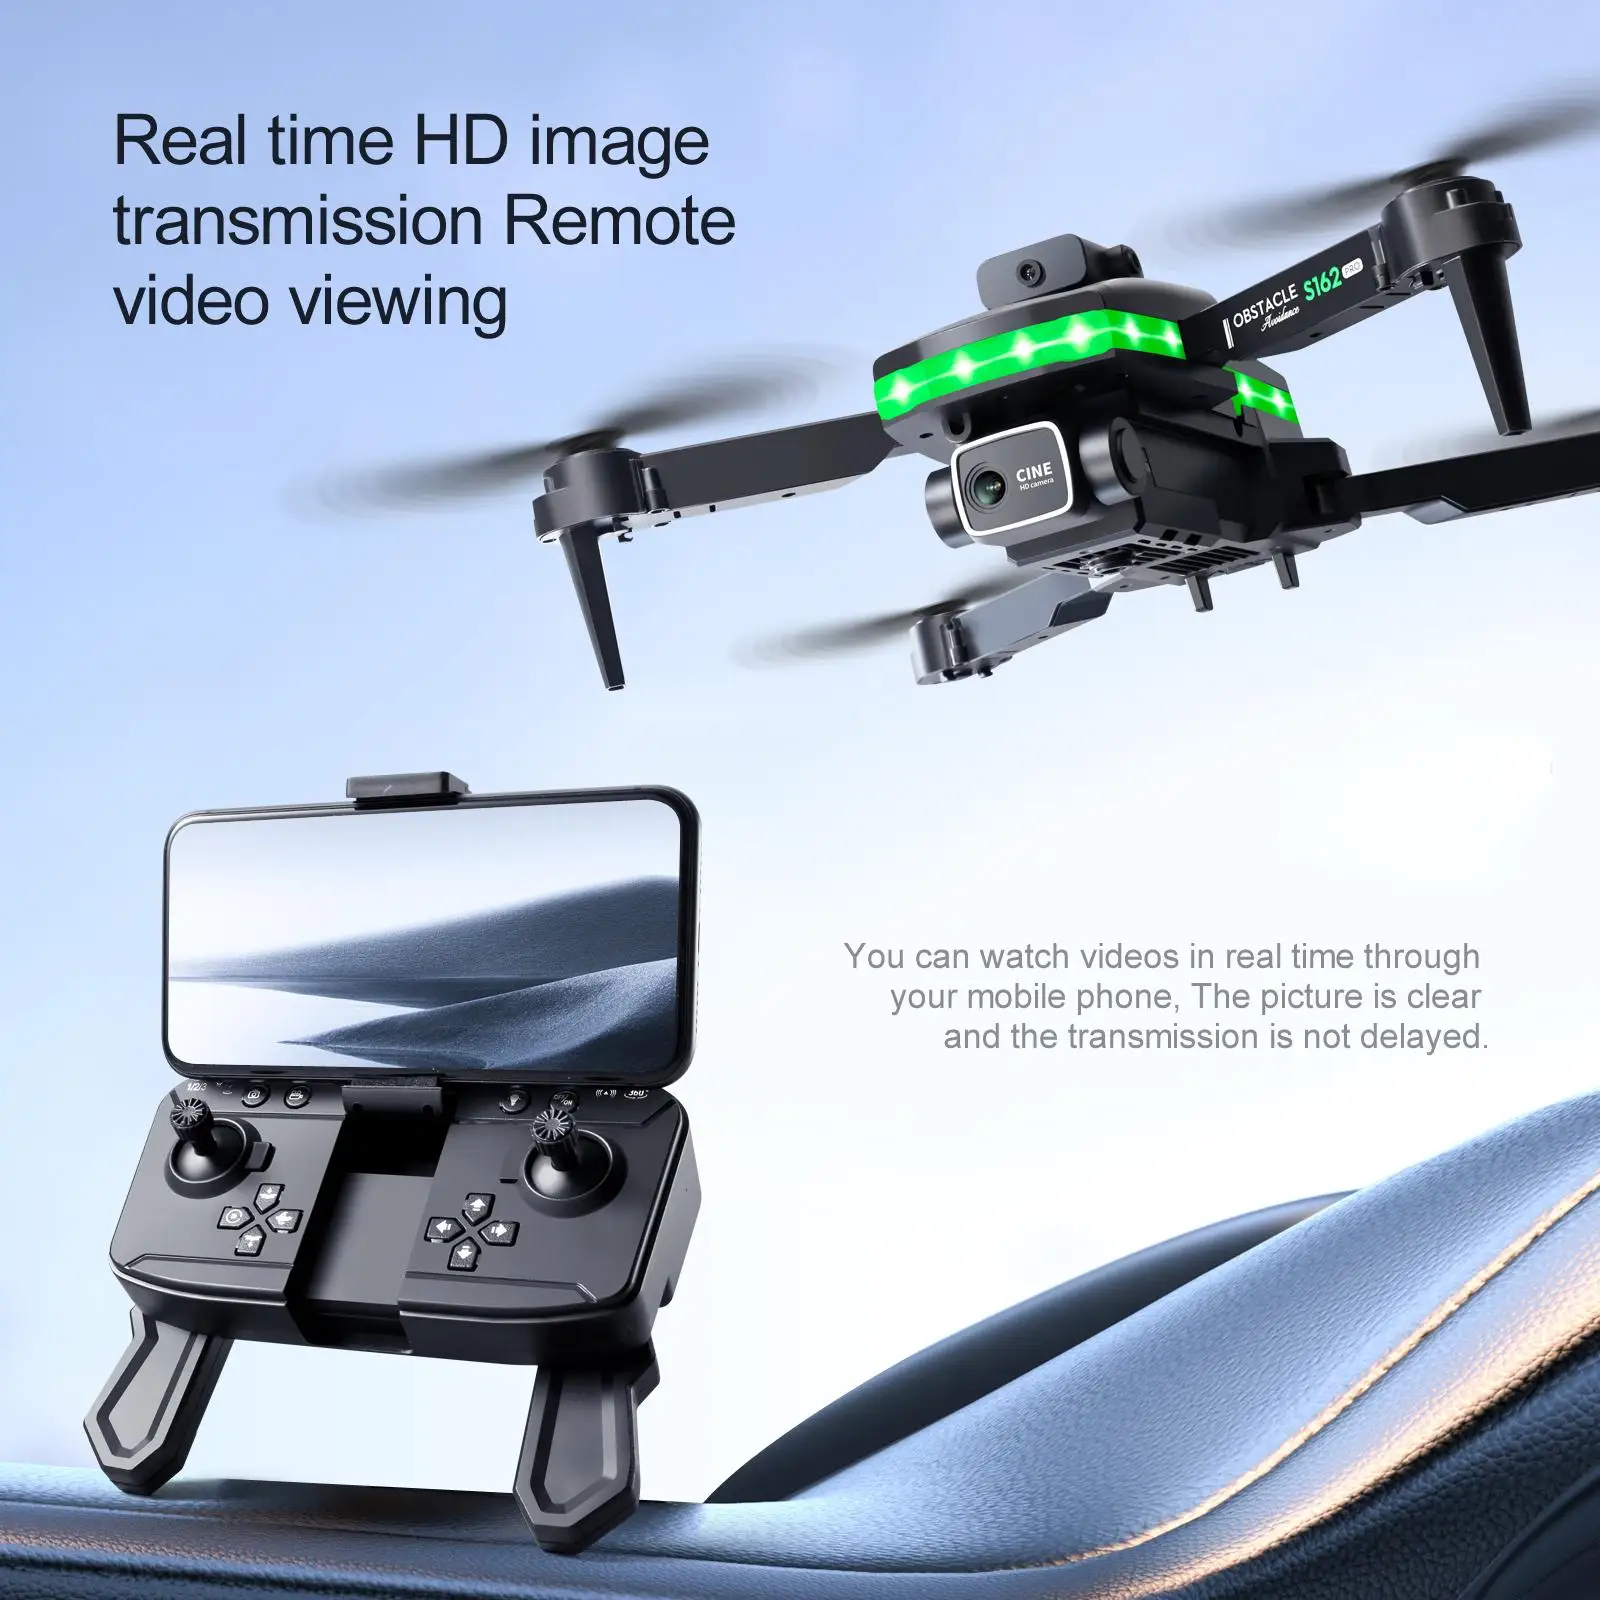 Foldable RC Quadcopter with Carrying Bag Gesture Selfie Remote Control Aircraft Toy for Girls Boys Adults Kids Best Gift